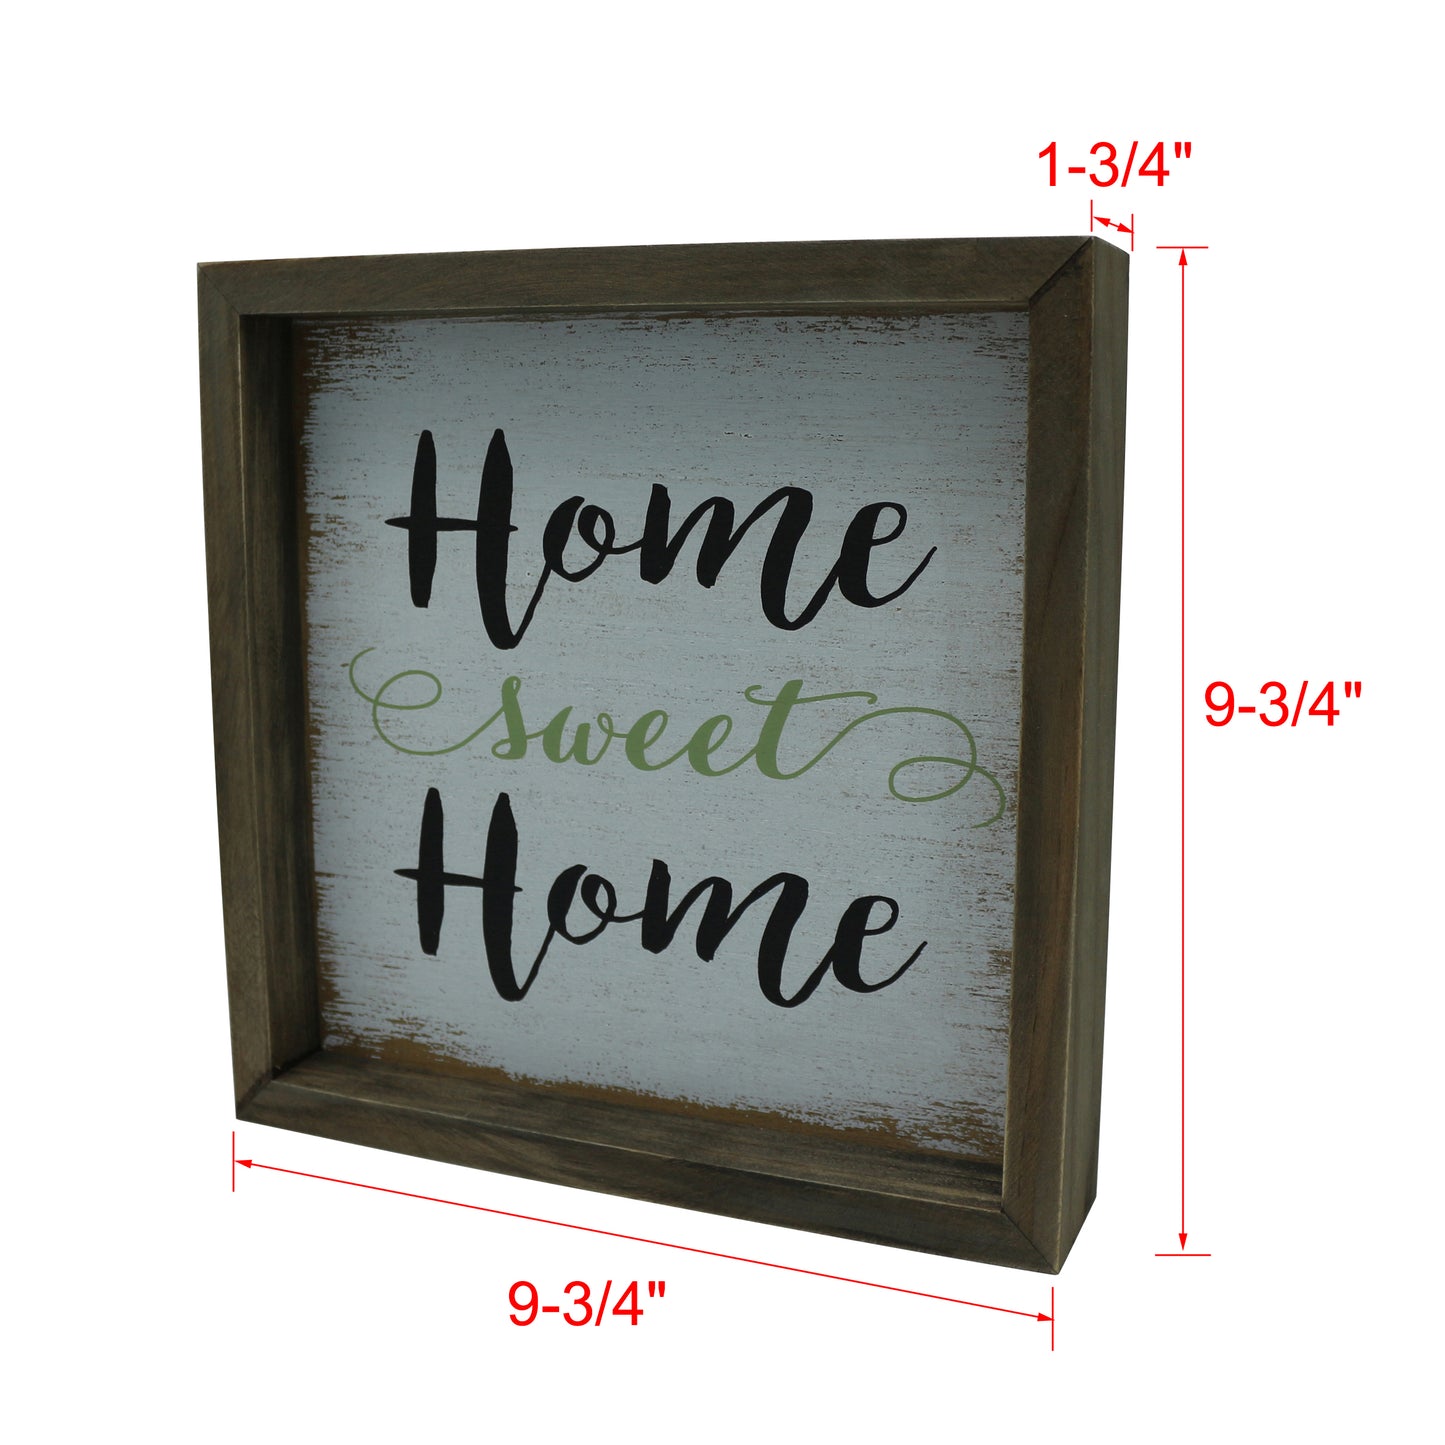 CVHOMEDECO. Primitives Distressed "Home sweet Home" Shadow Box Frame Wall Mounted Hanging Decor Art, 9.75 x 9.75 Inch